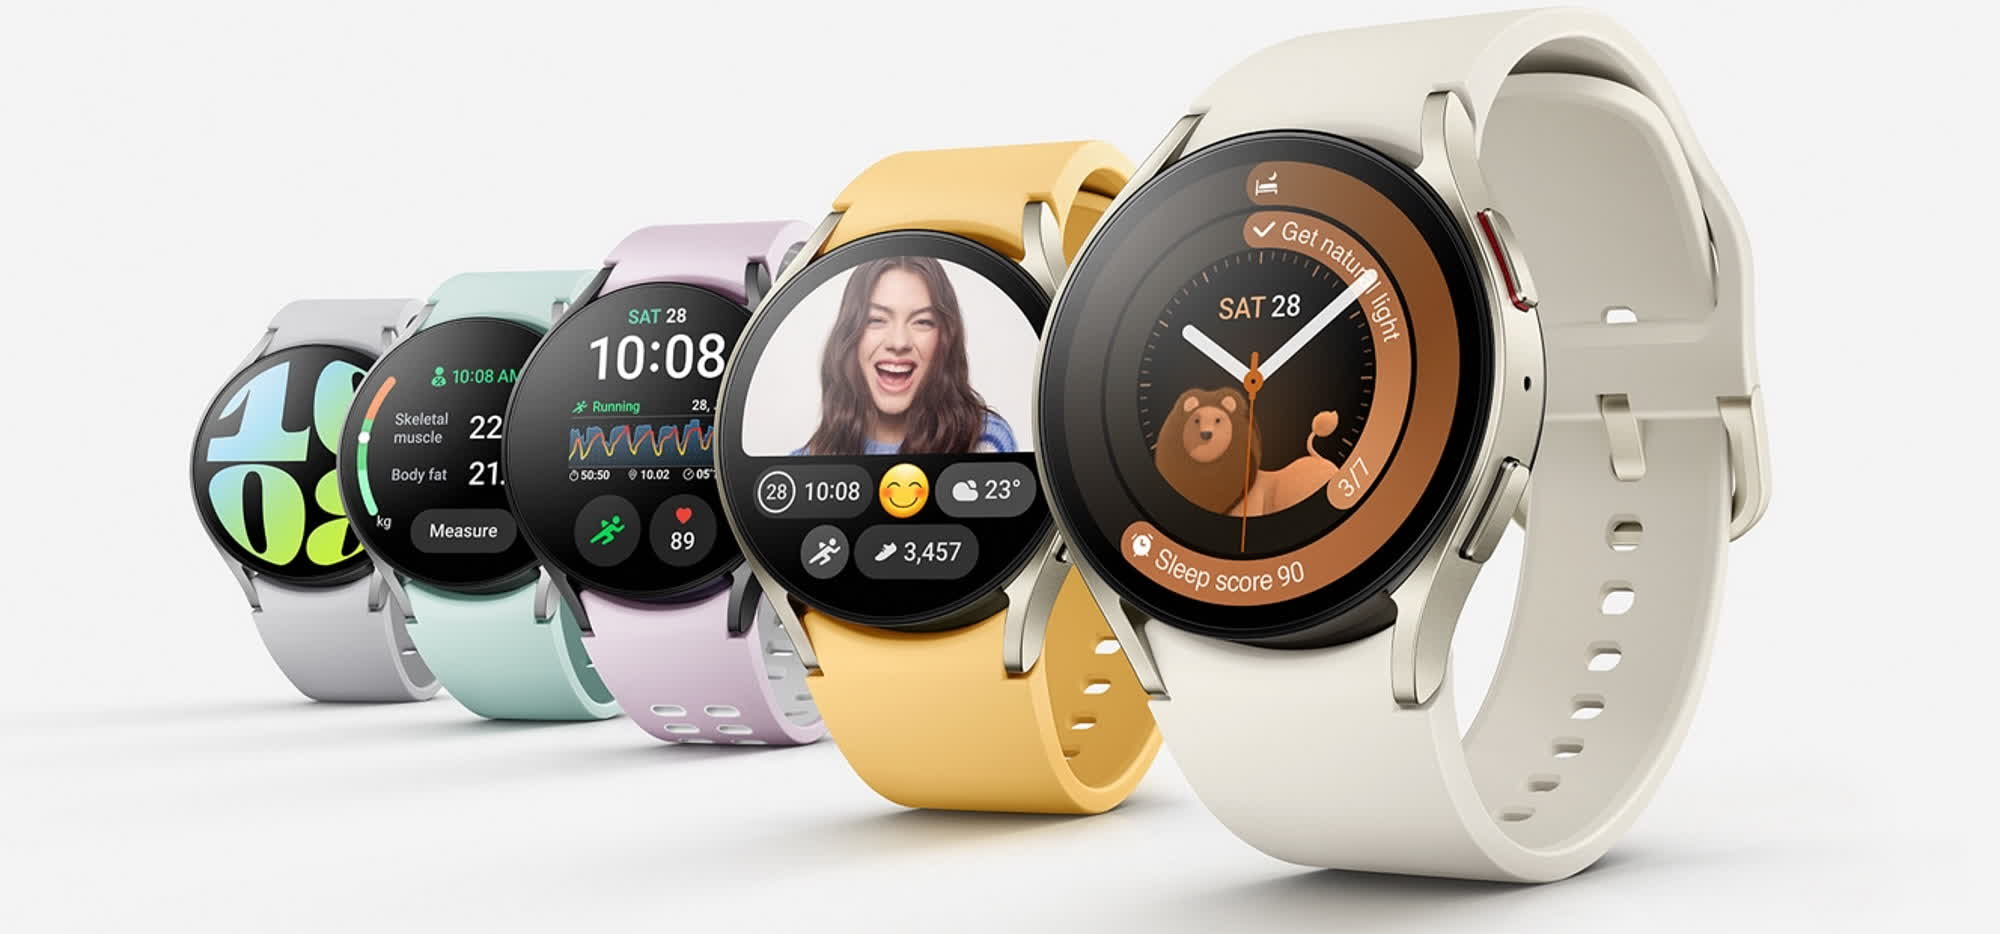 Google and Samsung are working on the next generation of Wear OS based on Android 14